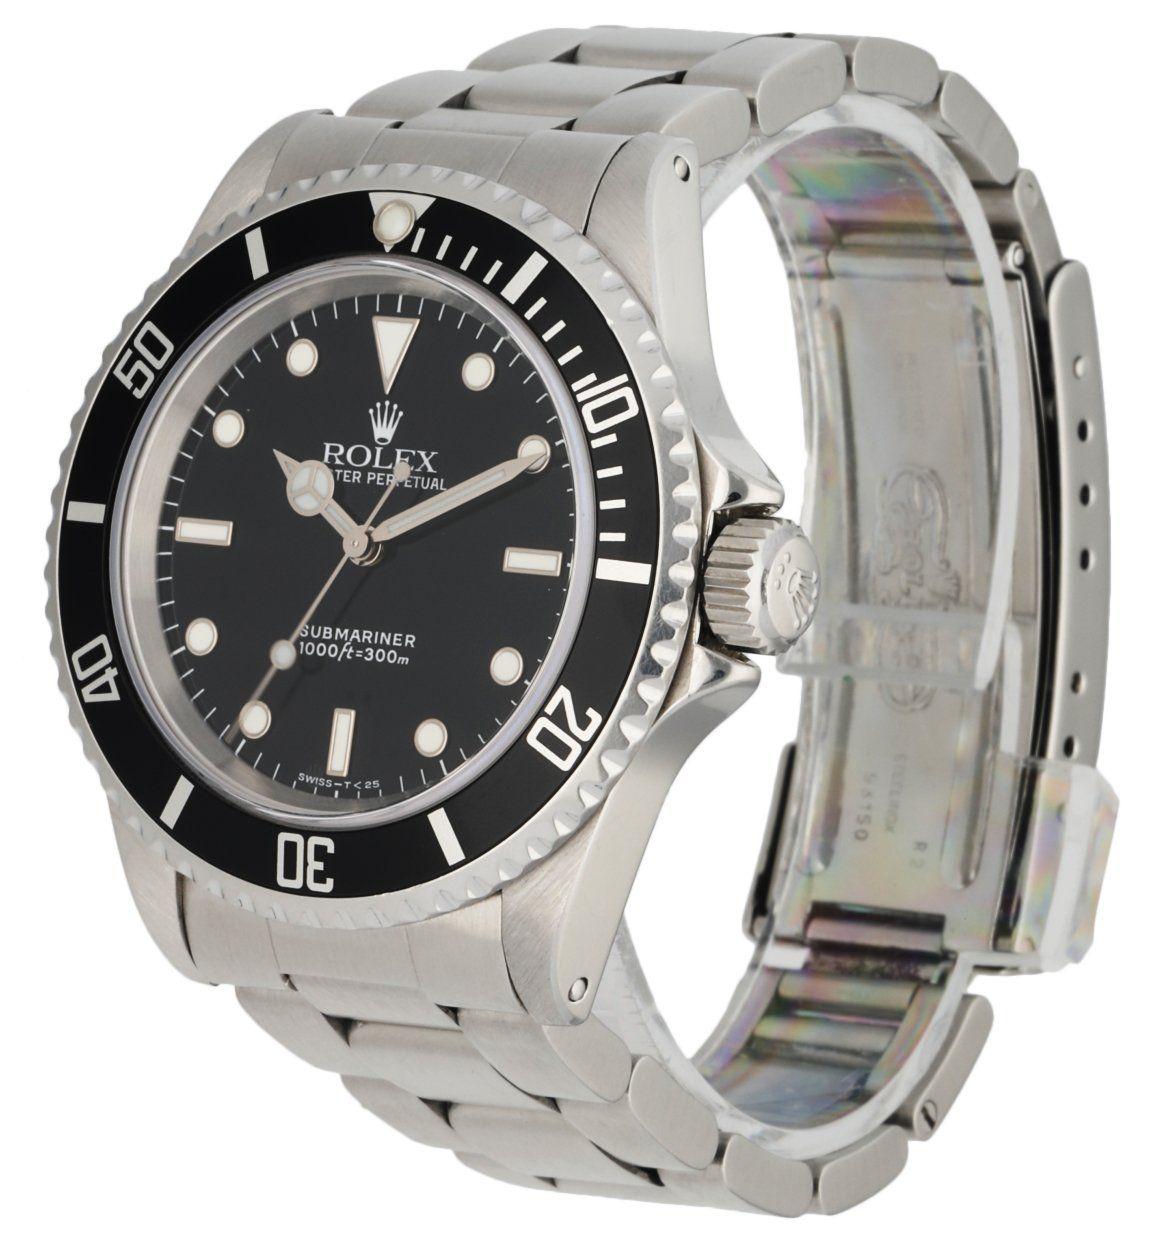 
Rolex Oyster Perpetual Submariner No Date 14060 Men's Watch. 40mm stainless steel case. Unidirectional rotating bezel with black bezel insert. Black dial with steel Tritium hands and hour markers. Stainless steel Oyster bracelet with a fold-over